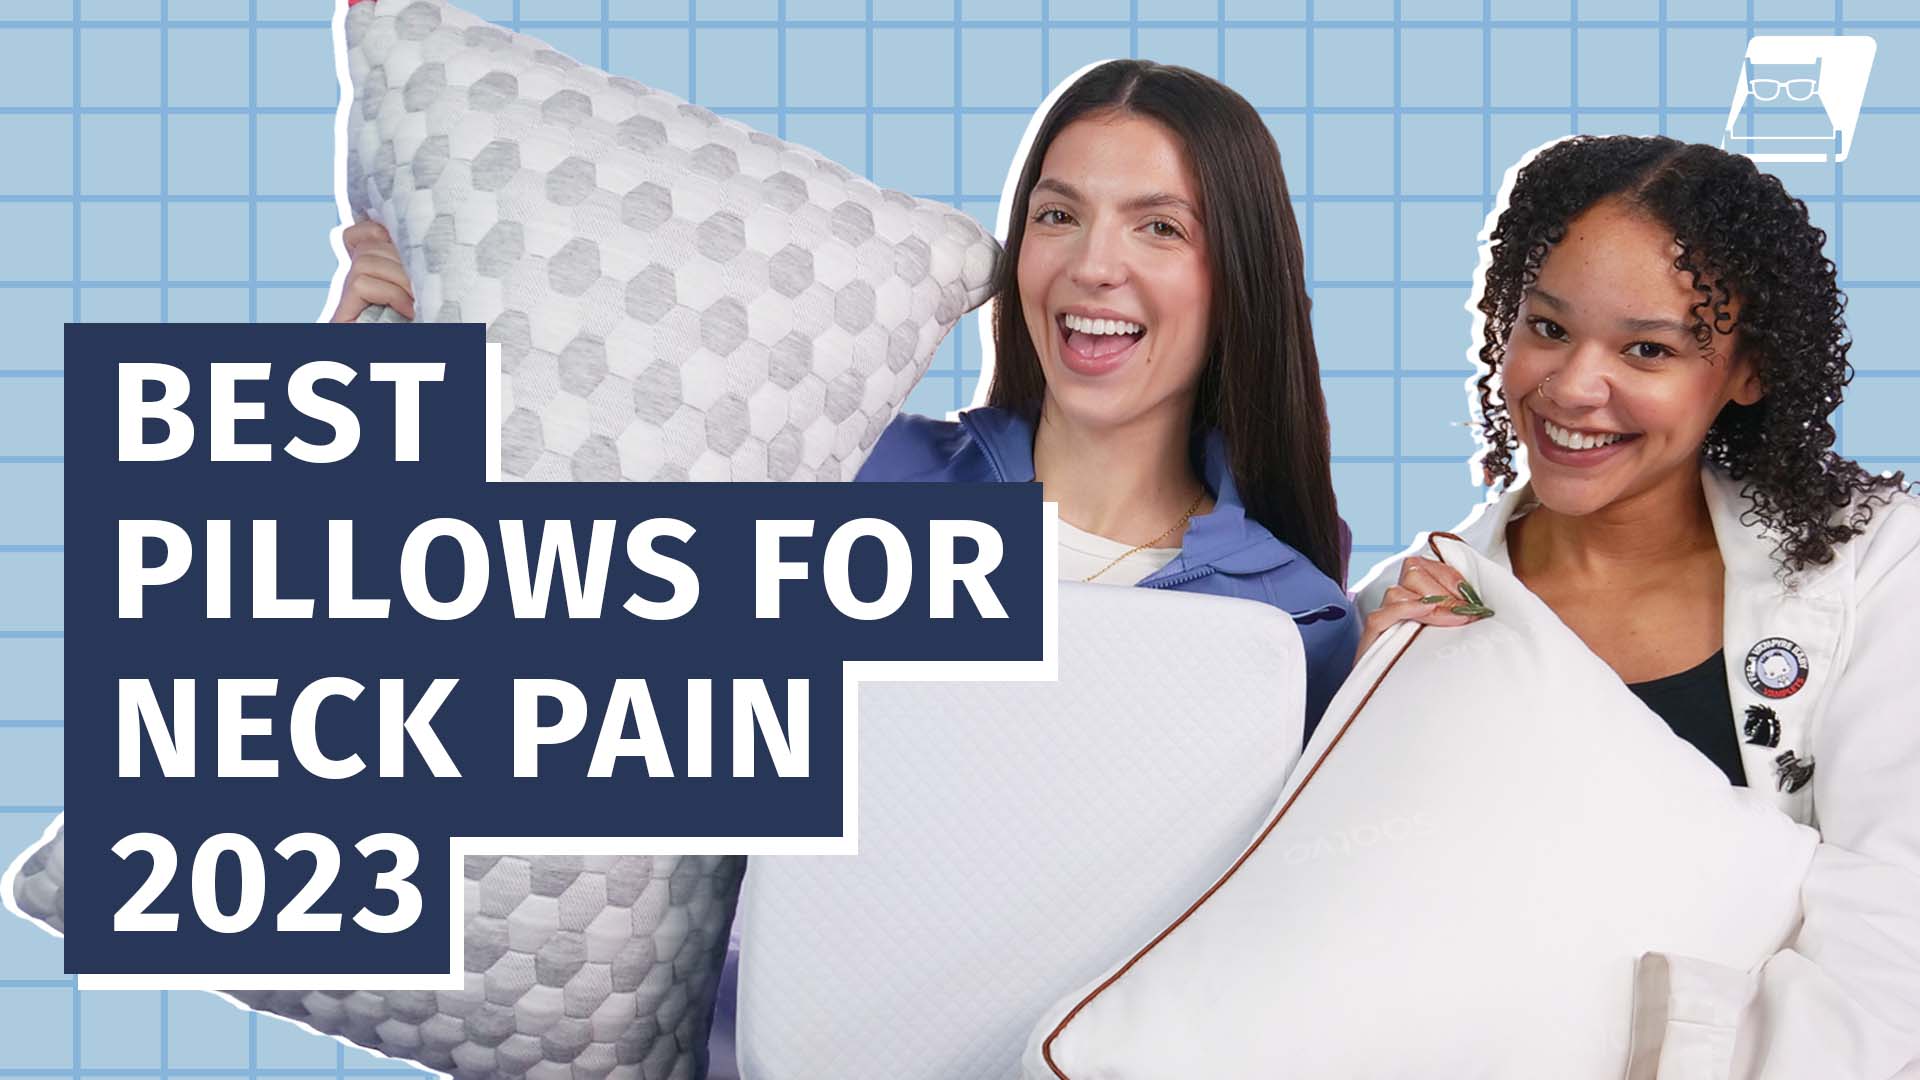 Go to Best Pillows for Neck Pain